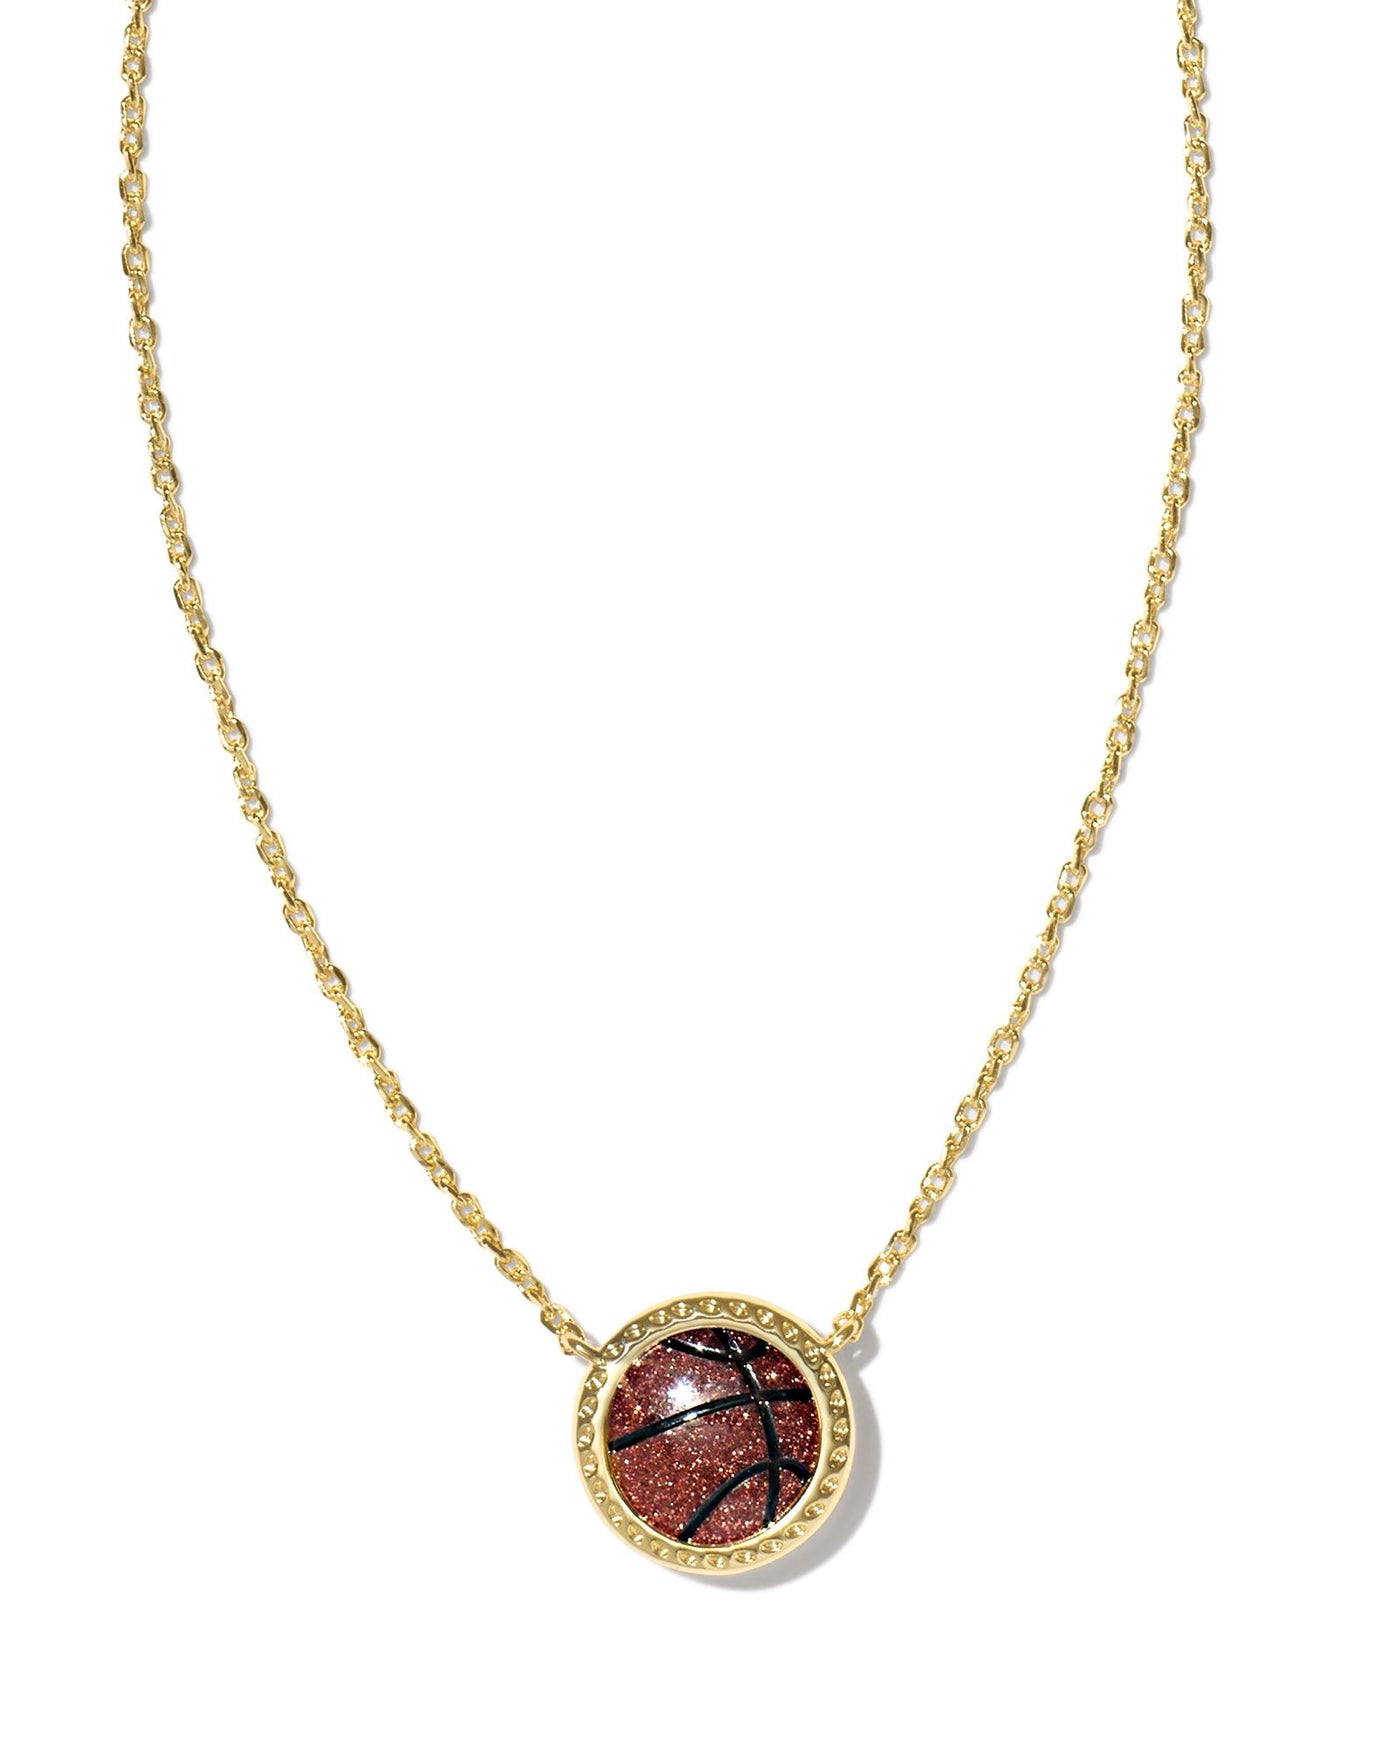 Kendra Scott Basketball Pendant Necklace in Gold on white background close up.